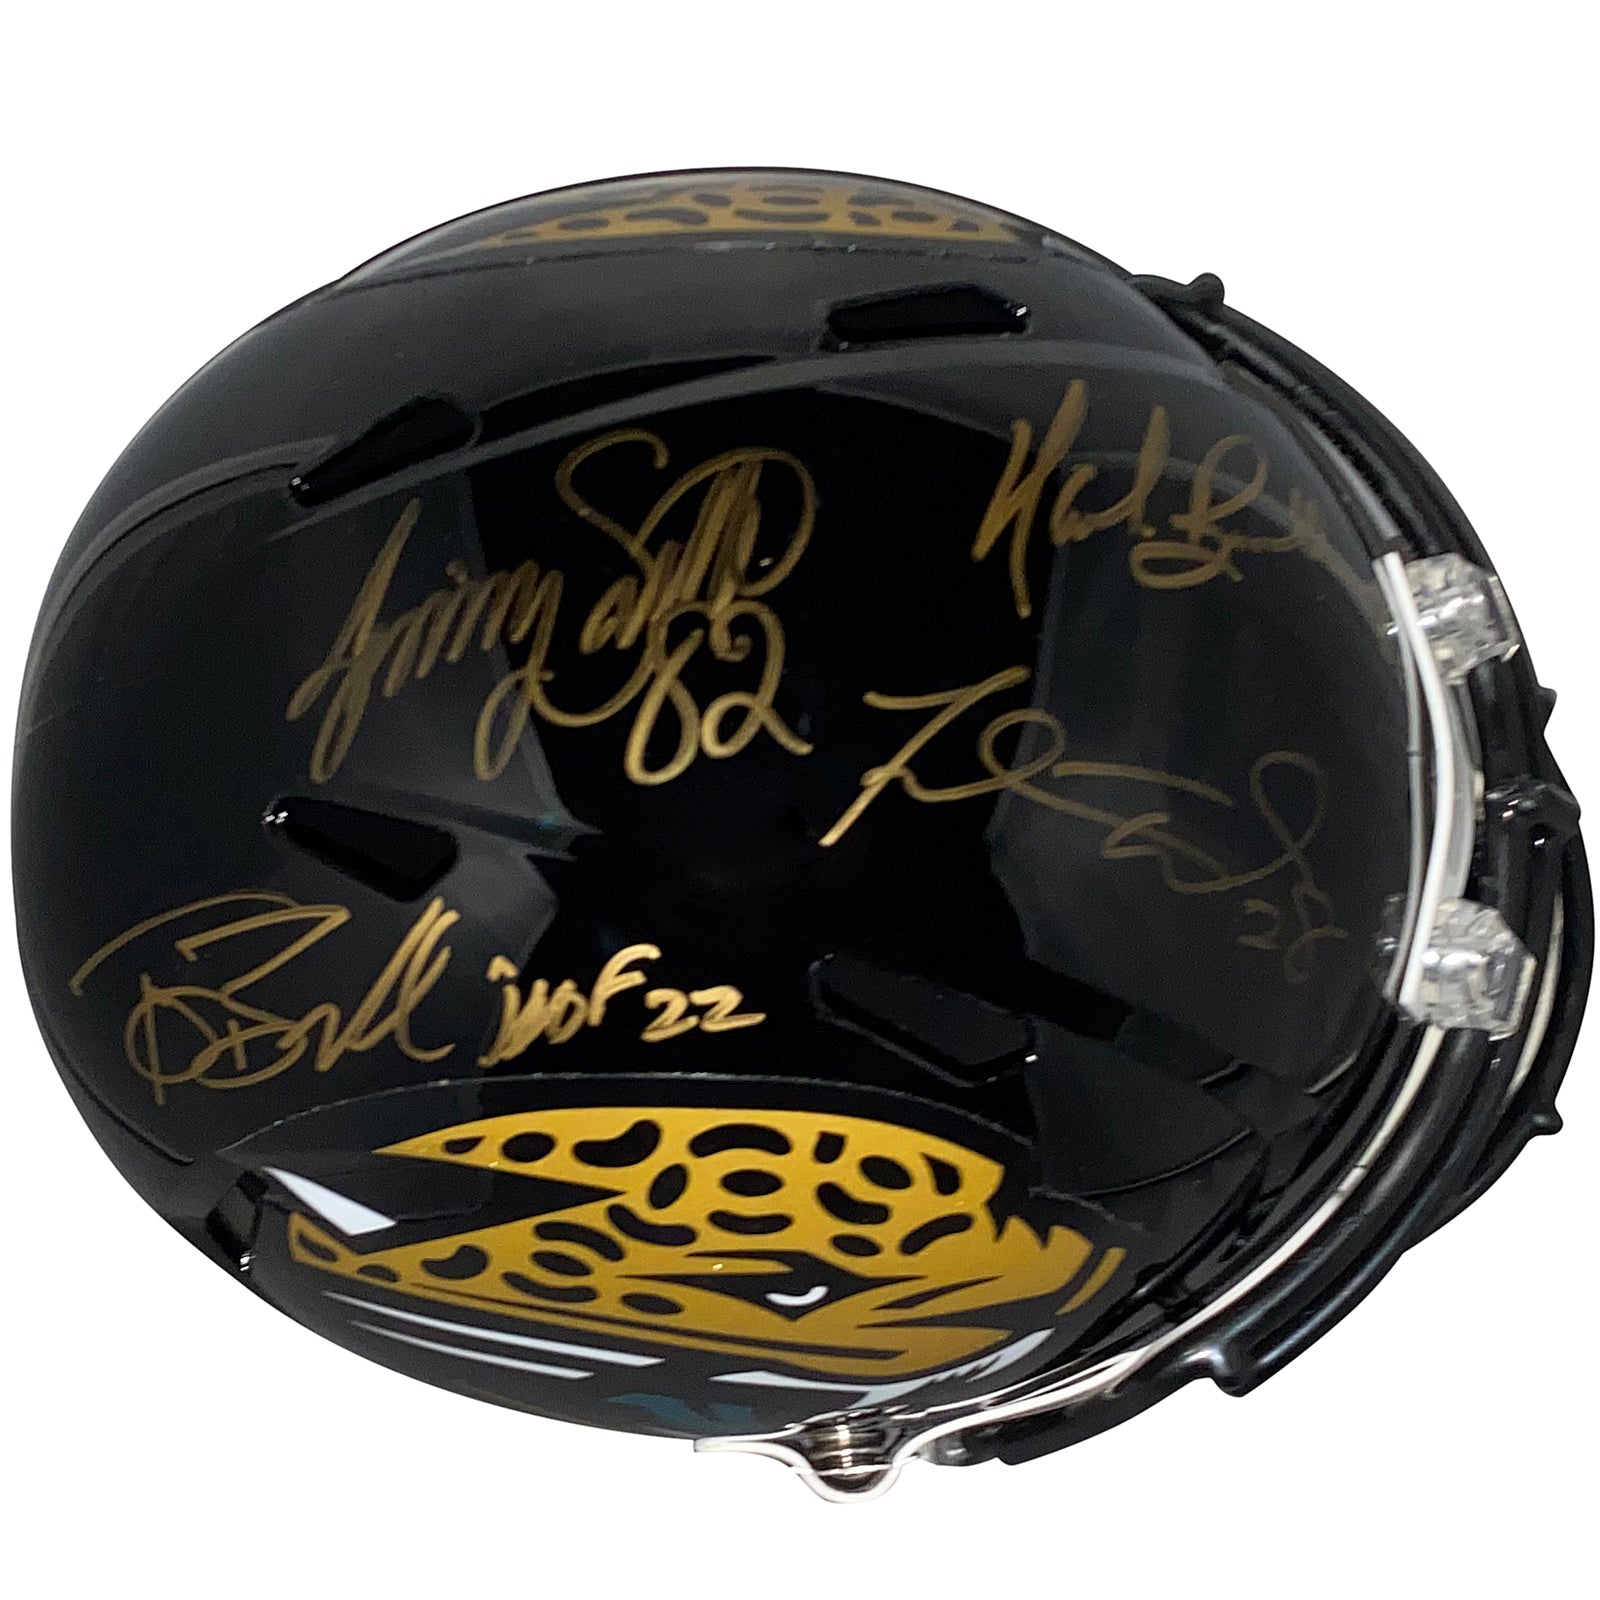 Tony Boselli, Mark Brunell, Jimmy Smith And Fred Taylor Autographed Jacksonville Jaguars Deluxe Full-Size Replica Helmet - Pride of the Jaguars